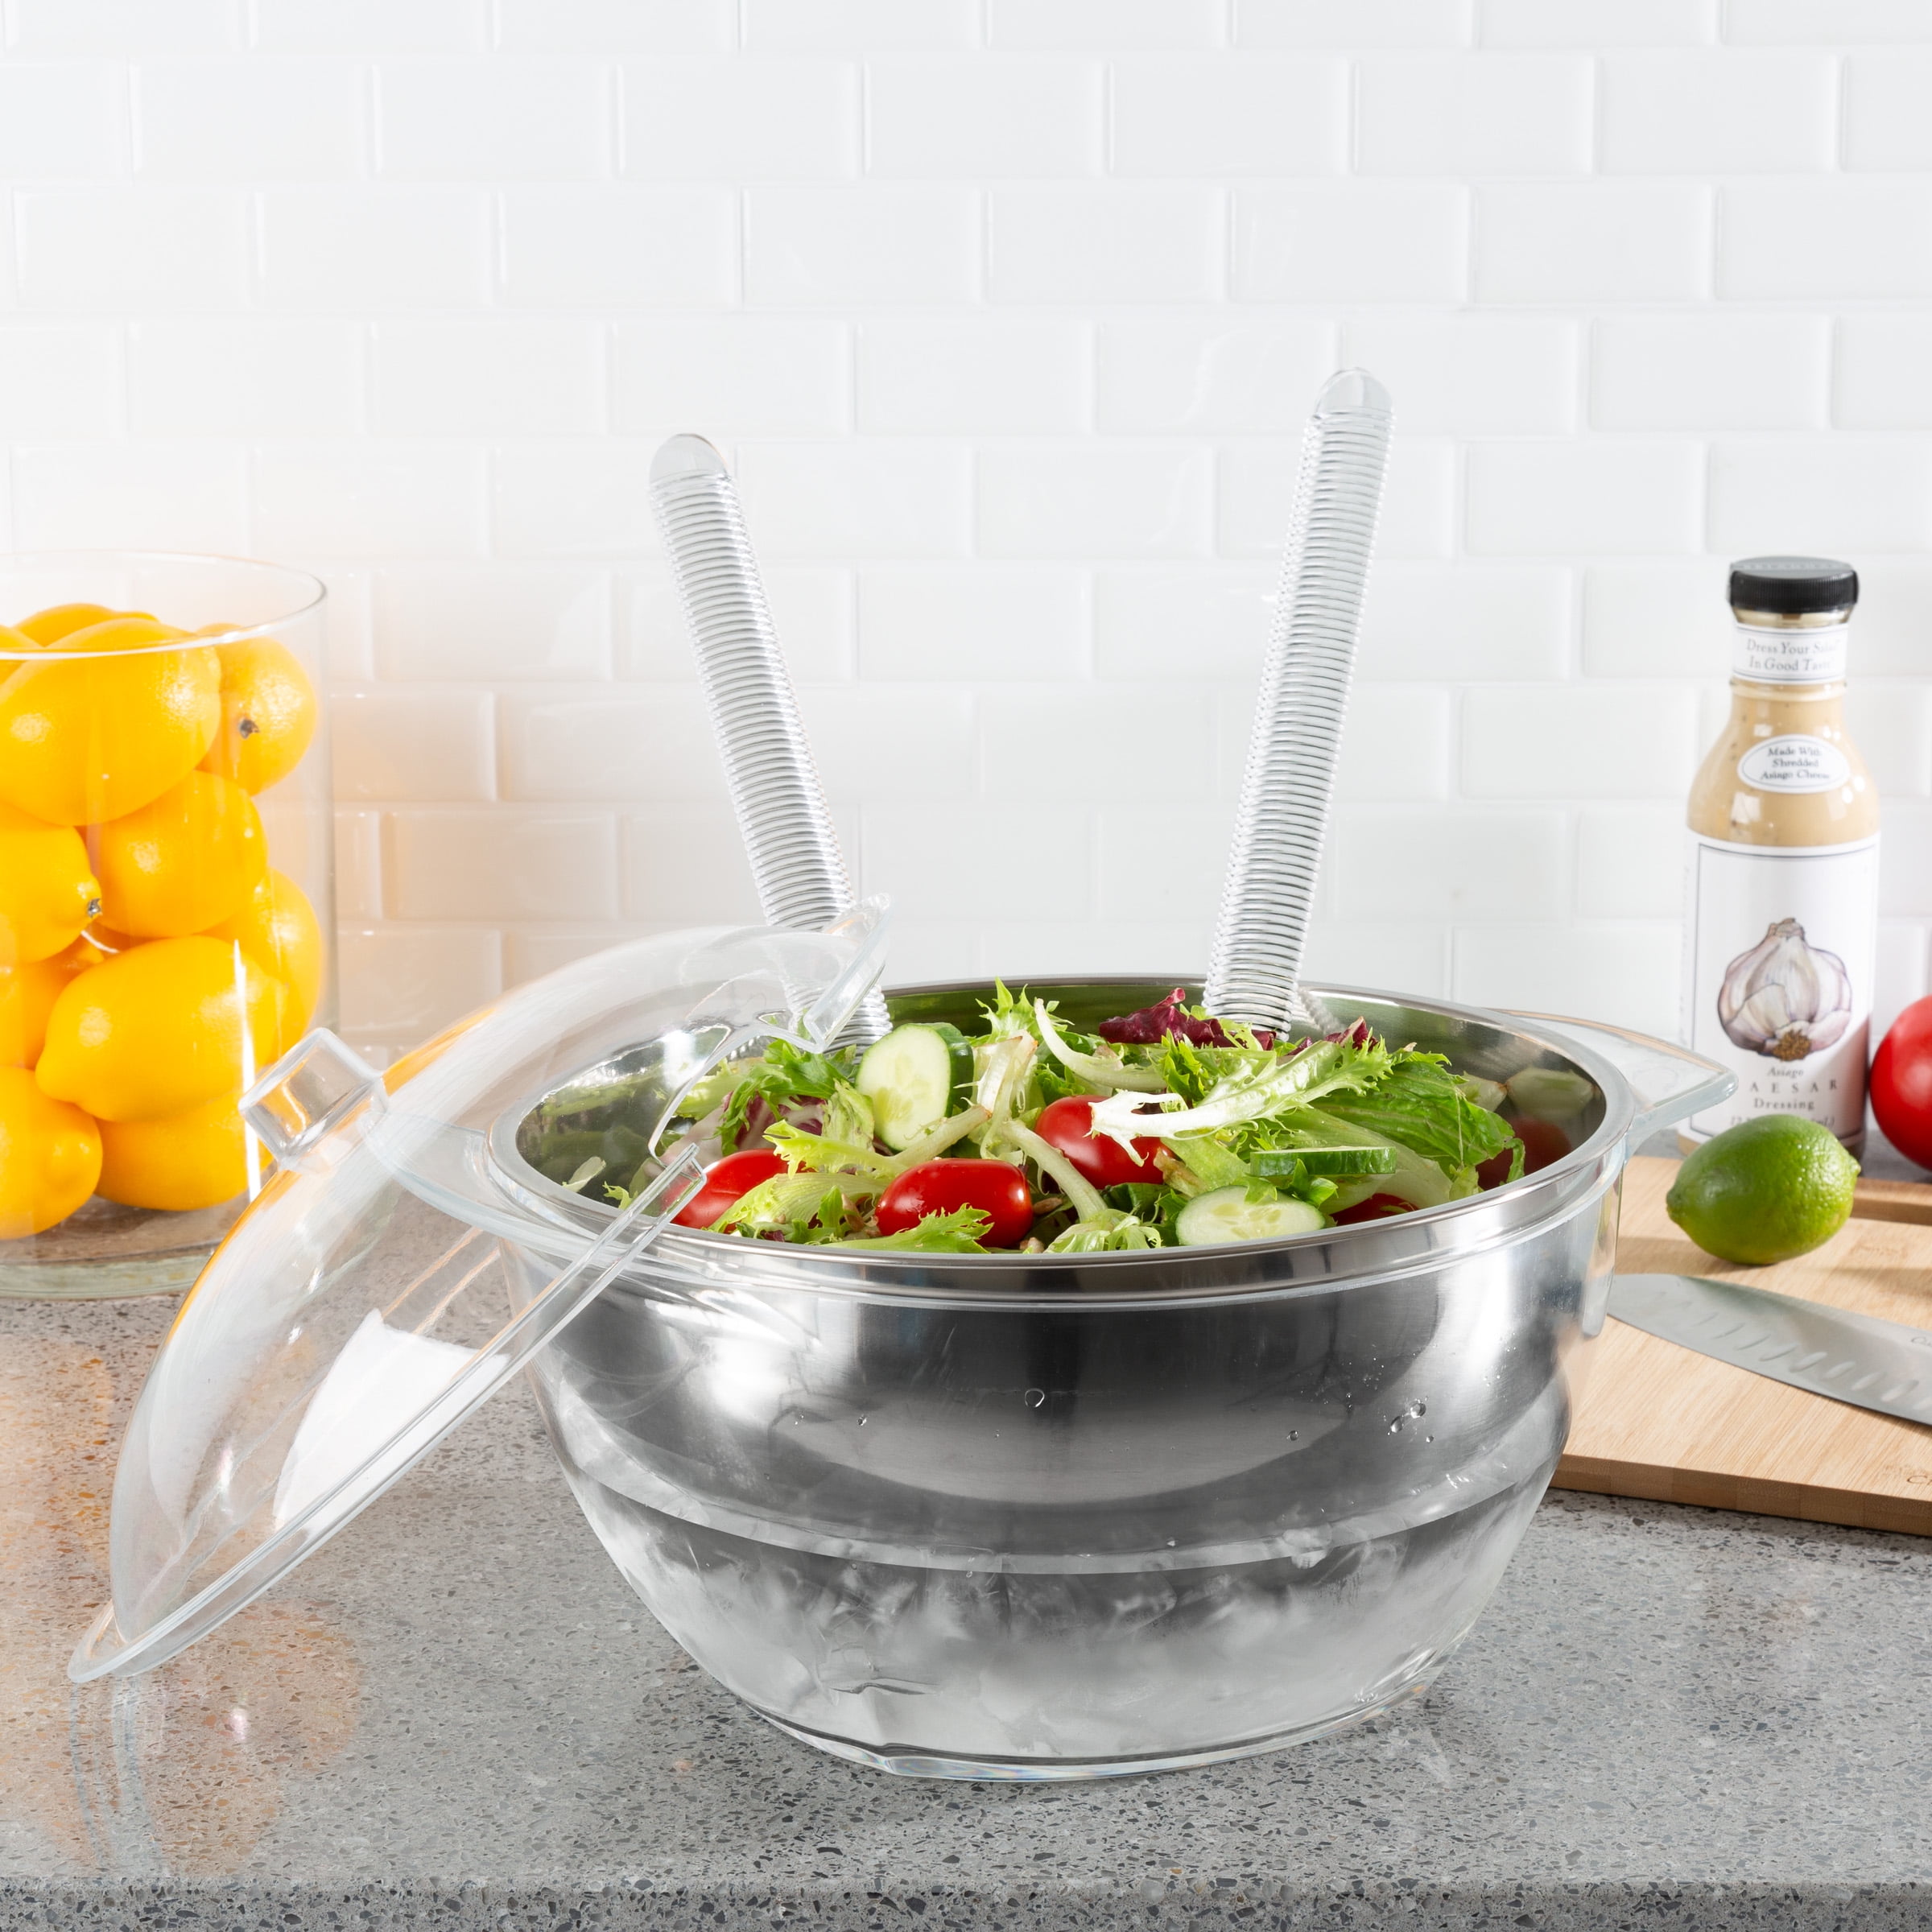 LIMOEASY Iced Salad Bowl, 4.5 Qt Large Chilled Serving Bowl with Lid for  Parties, Ice Bowls to Keep Veggie, Fruit, Potato, Pasta Cold, Unique Gift  for